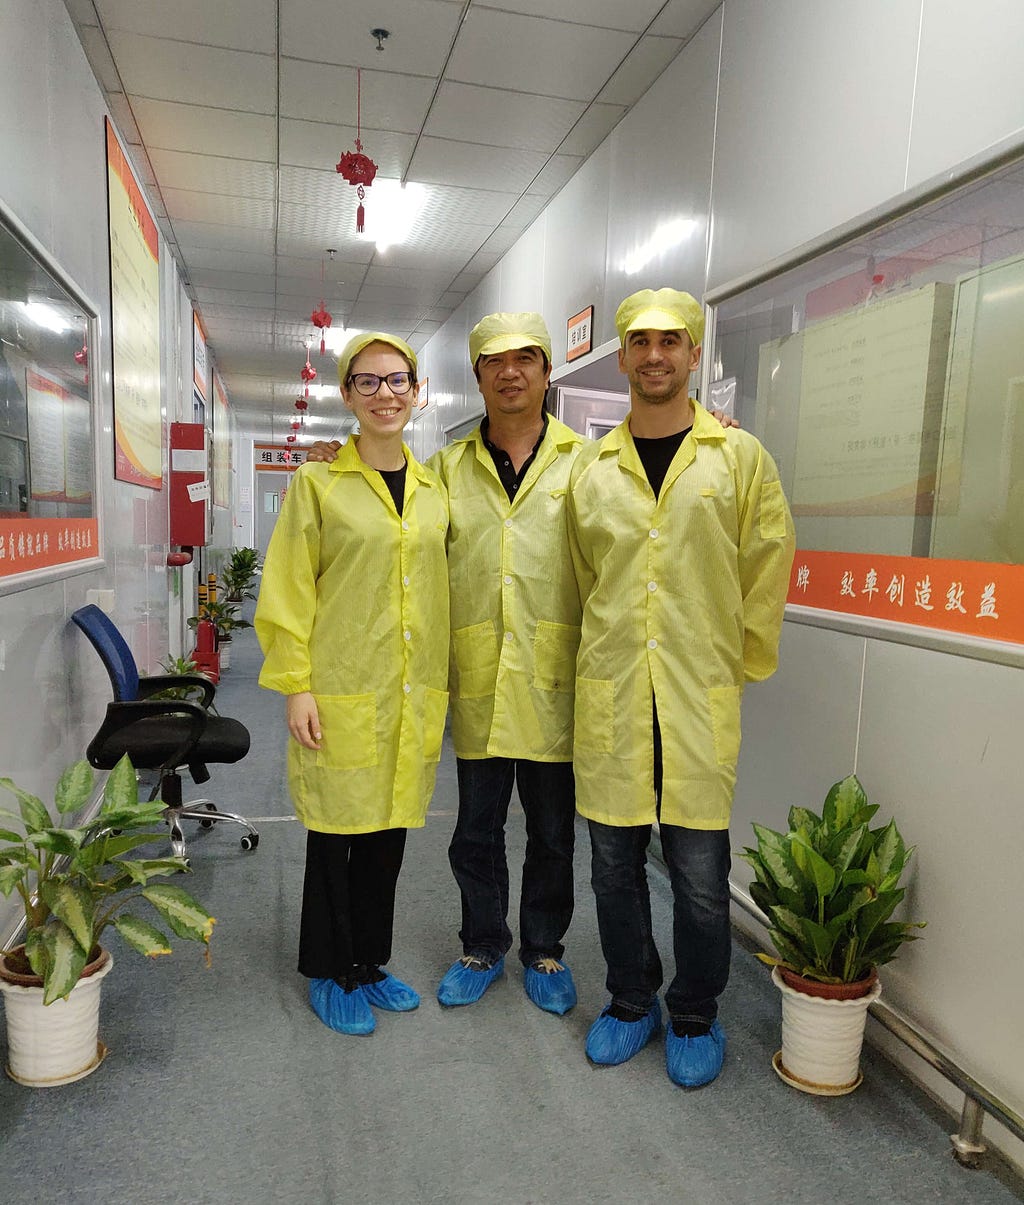 the imagiLabs team on a factory tour in Shenzhen, China